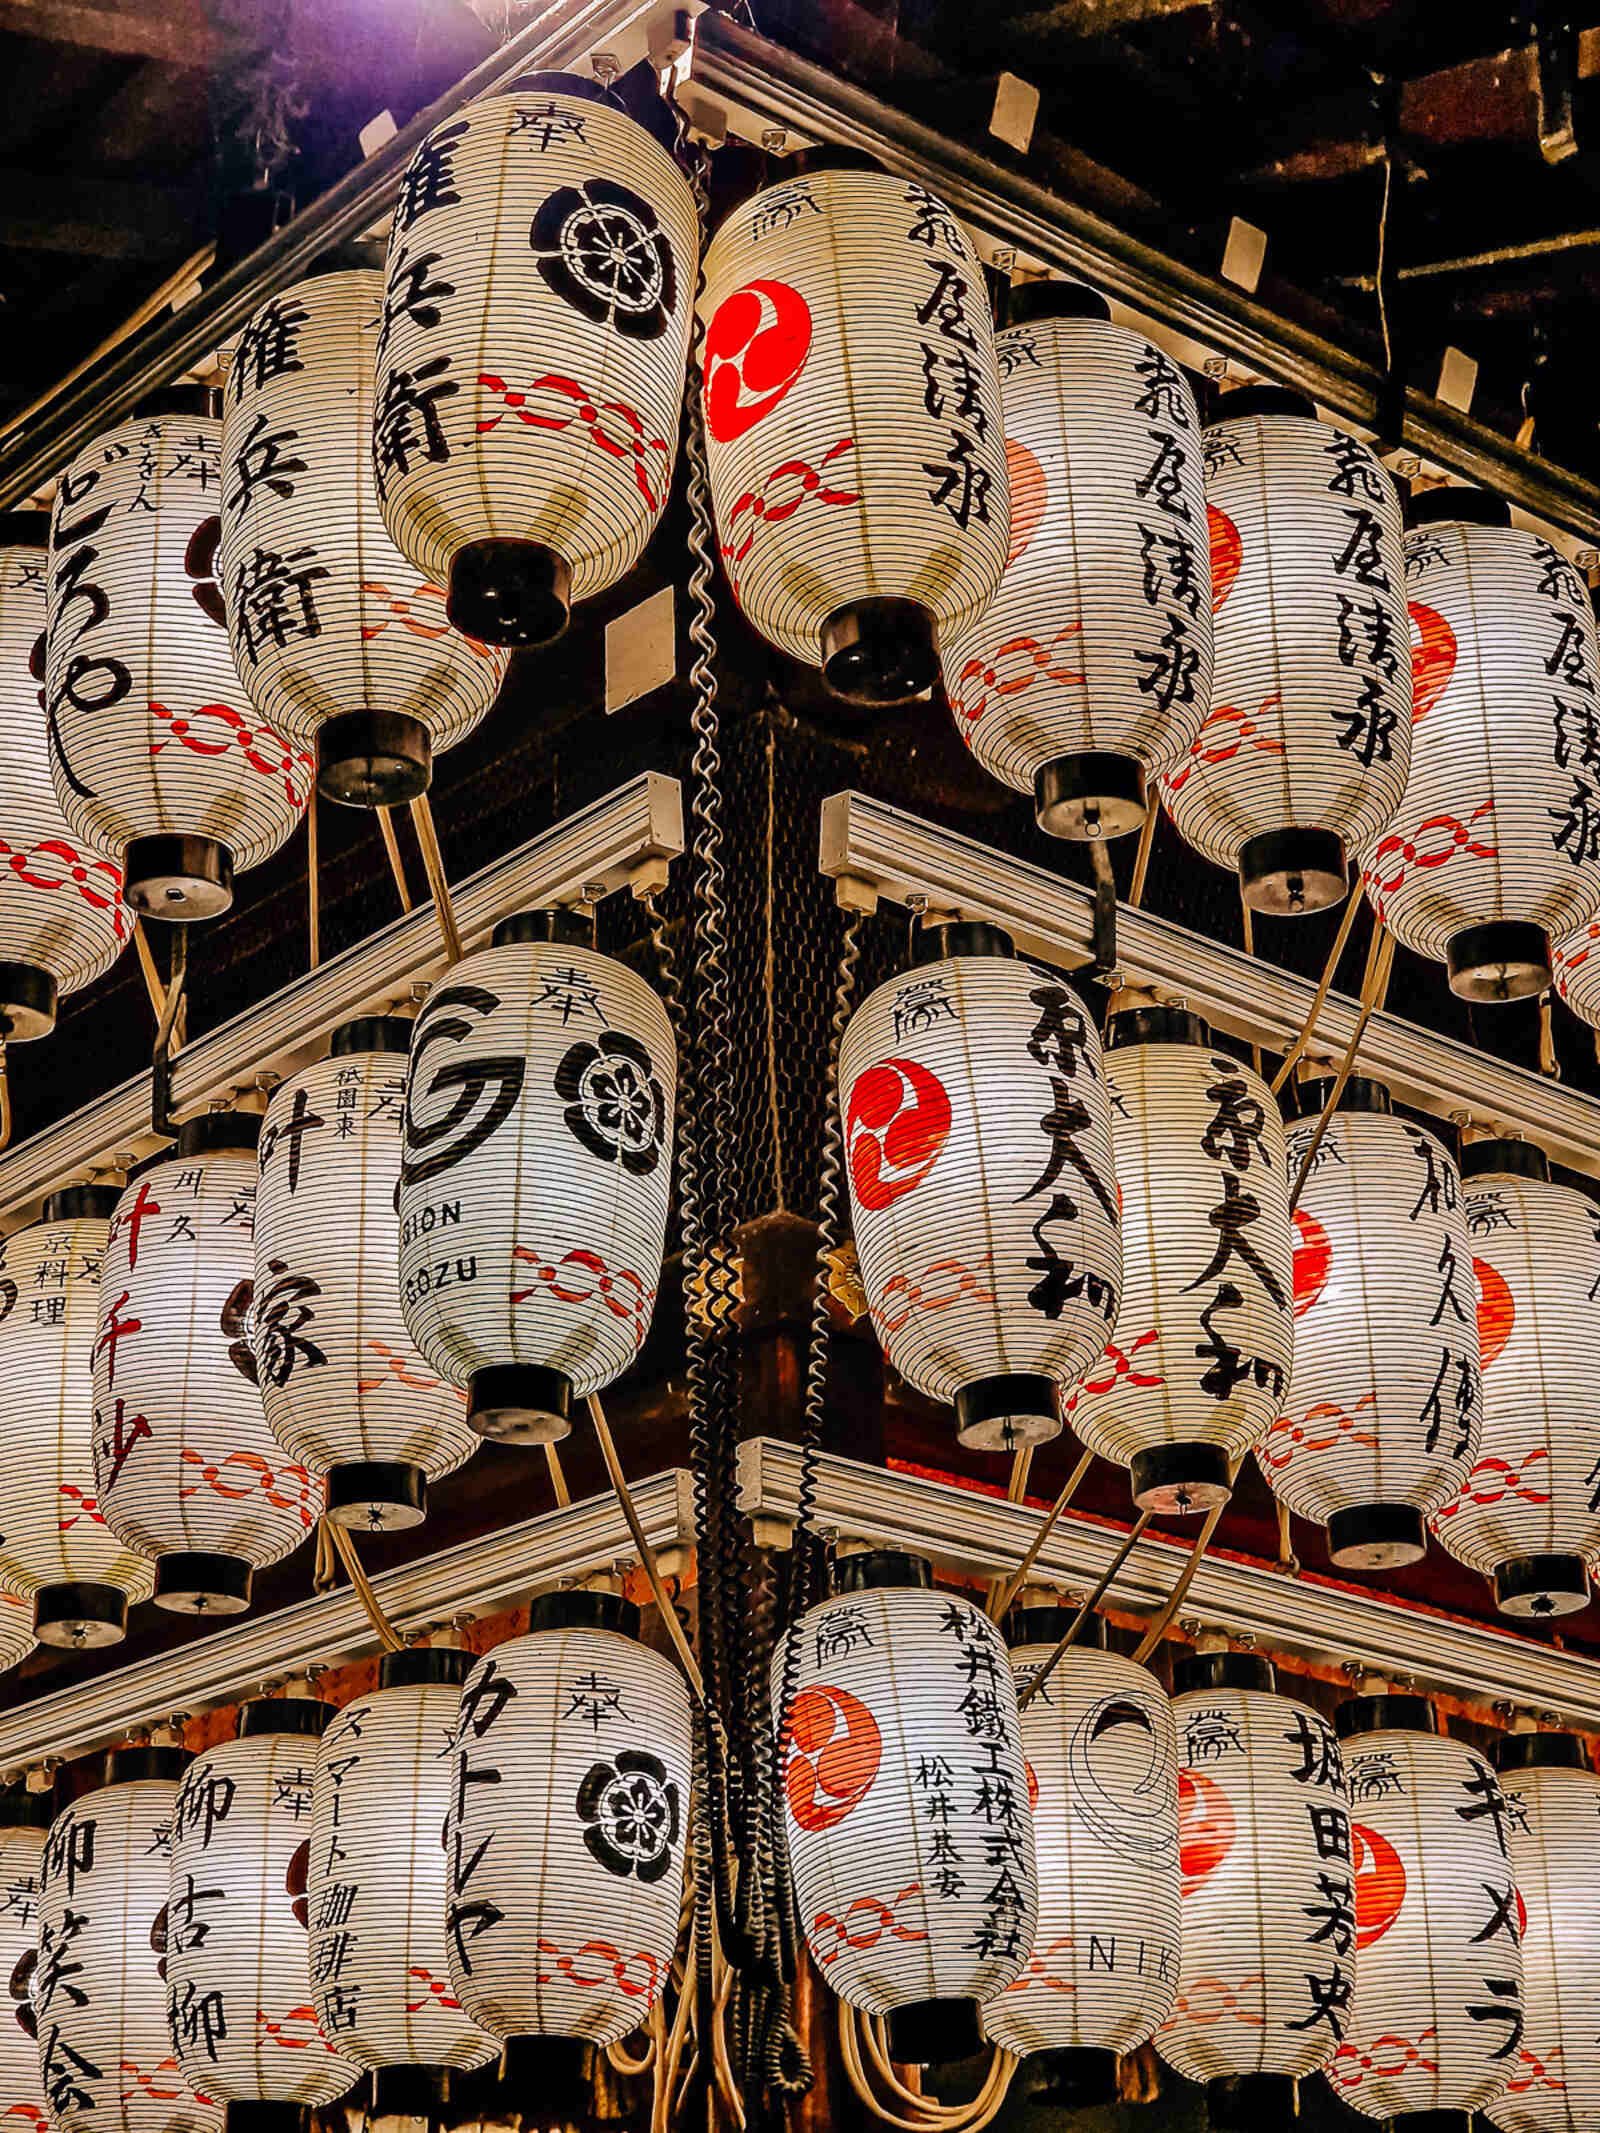 a wall of white Japanese lanterns lit up at night with black and red Japanese writing on them